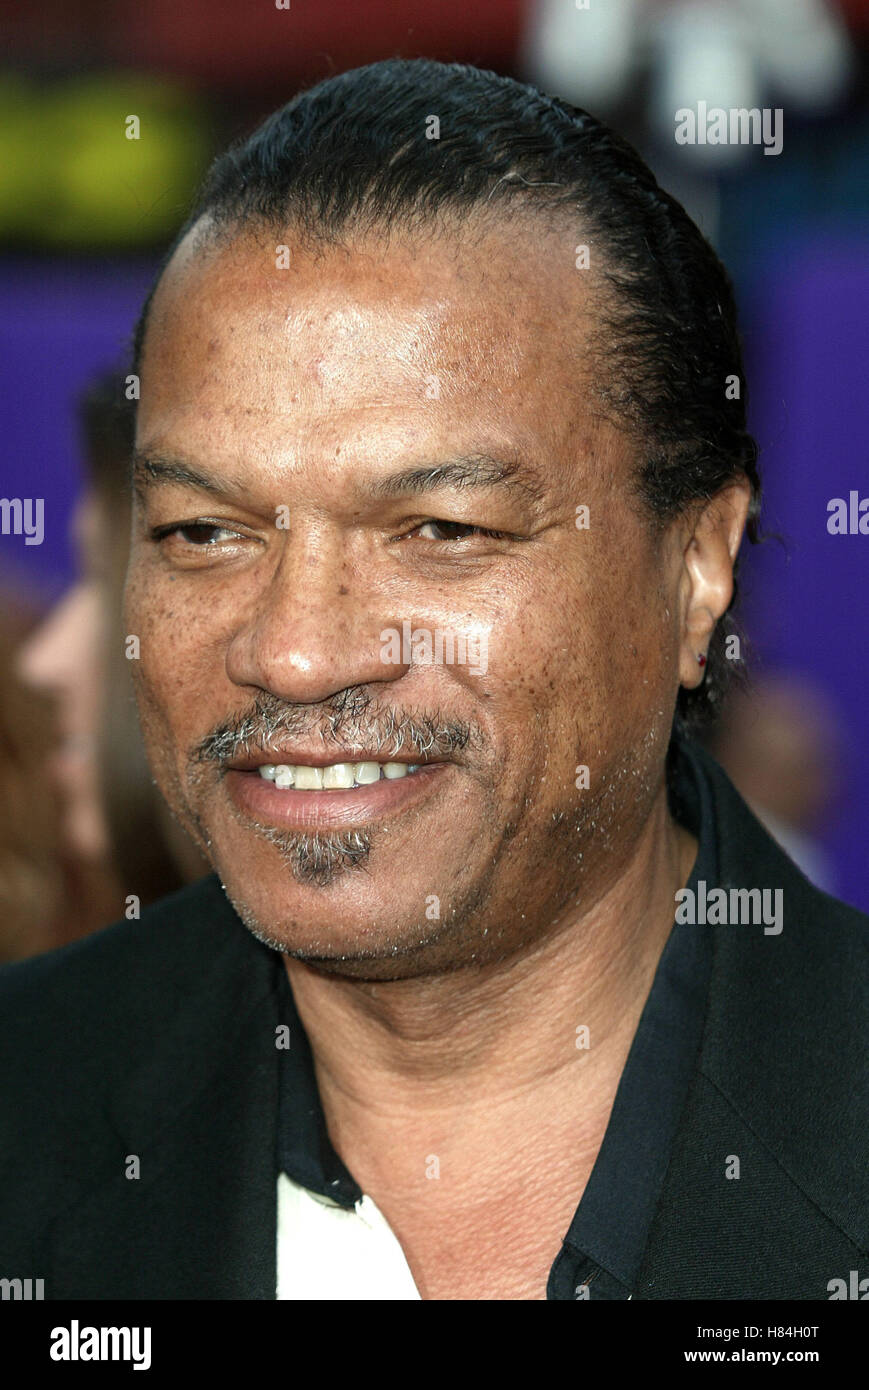 BILLY DEE WILLIAMS UNDERCOVER BROTHER PREM FILM UNIVERSAL CITYWALK BURBANK LOS ANGELES USA 30 mai 2002 Banque D'Images